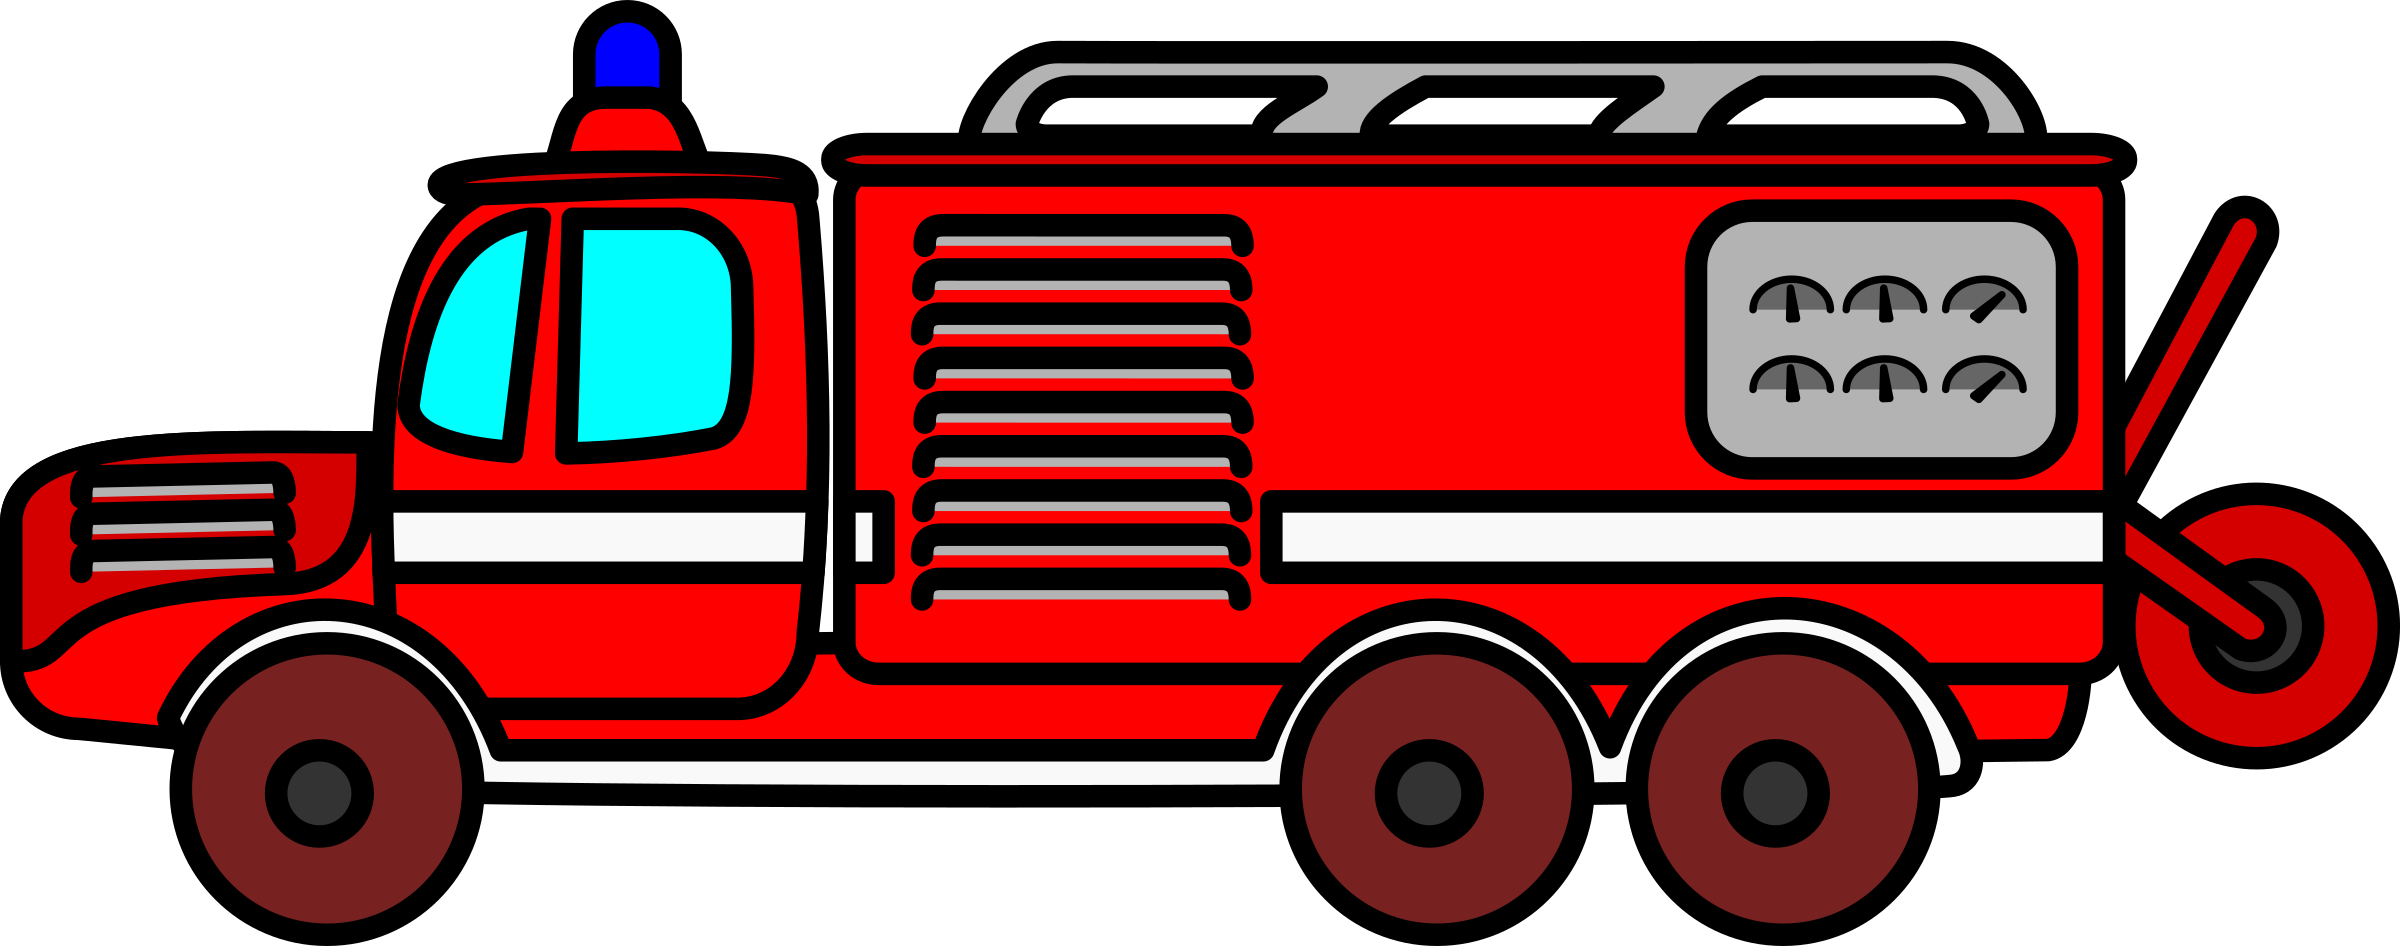 engine clipart fire